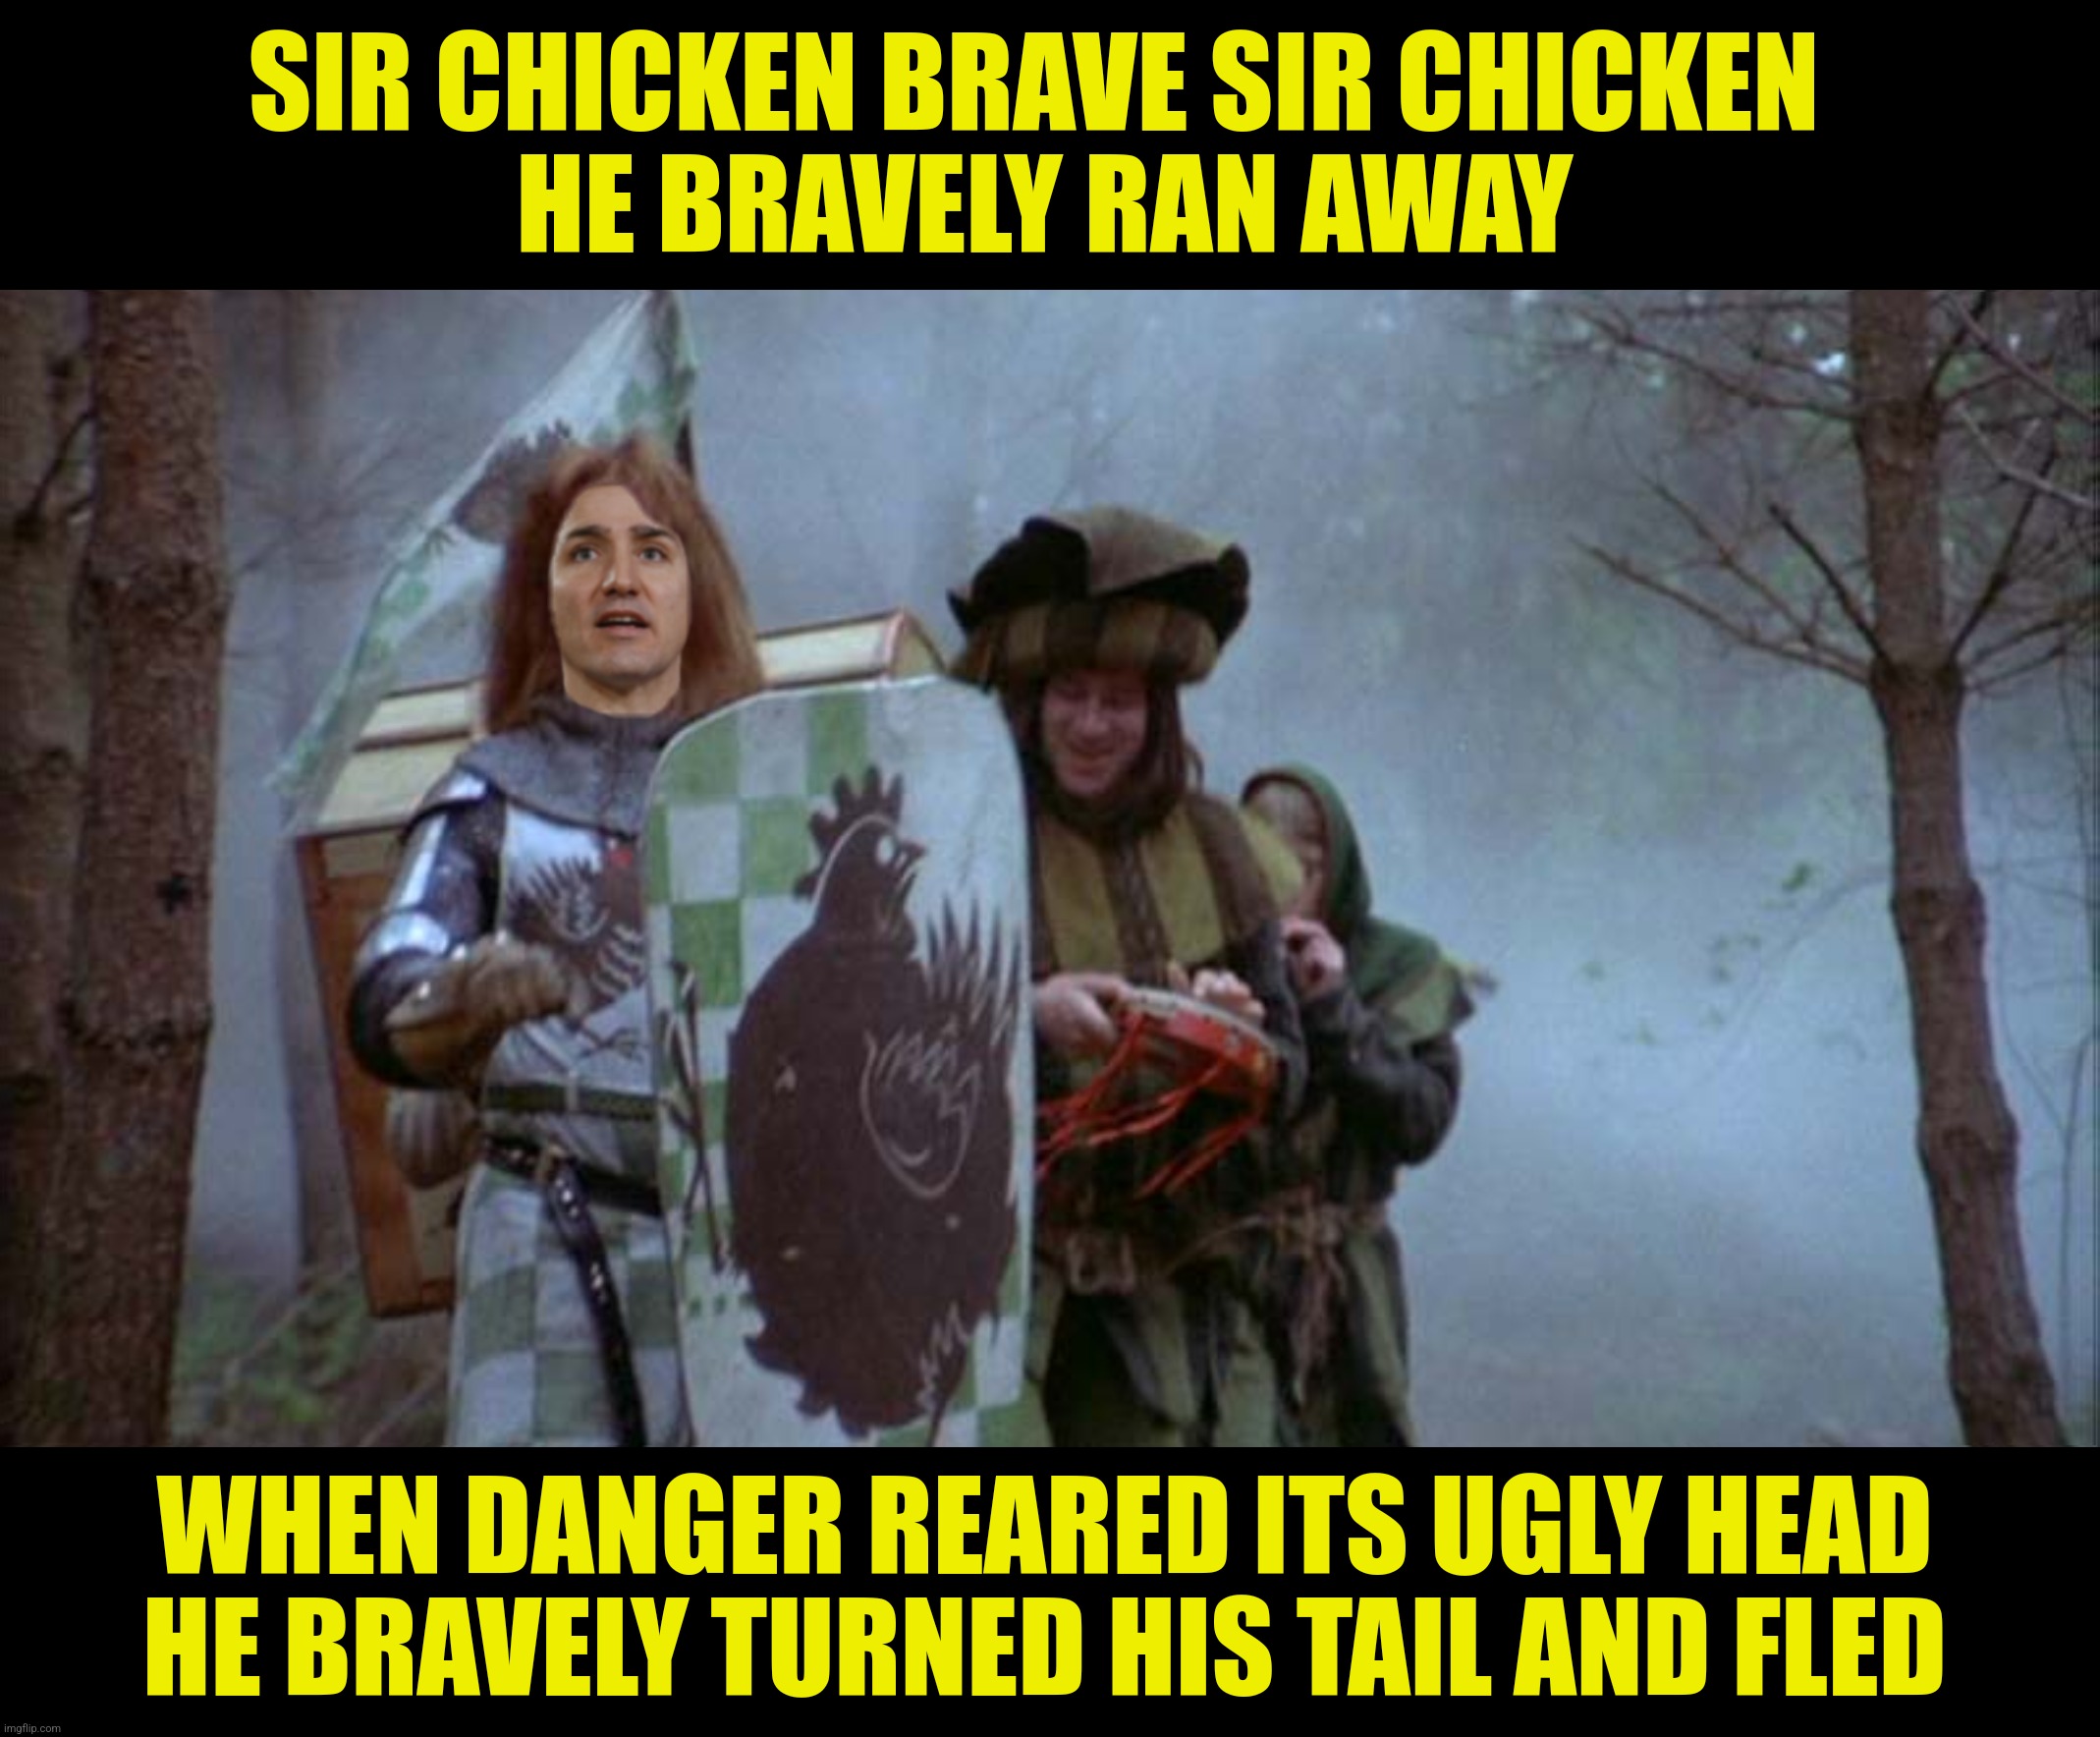 SIR CHICKEN BRAVE SIR CHICKEN 
HE BRAVELY RAN AWAY WHEN DANGER REARED ITS UGLY HEAD
HE BRAVELY TURNED HIS TAIL AND FLED | made w/ Imgflip meme maker